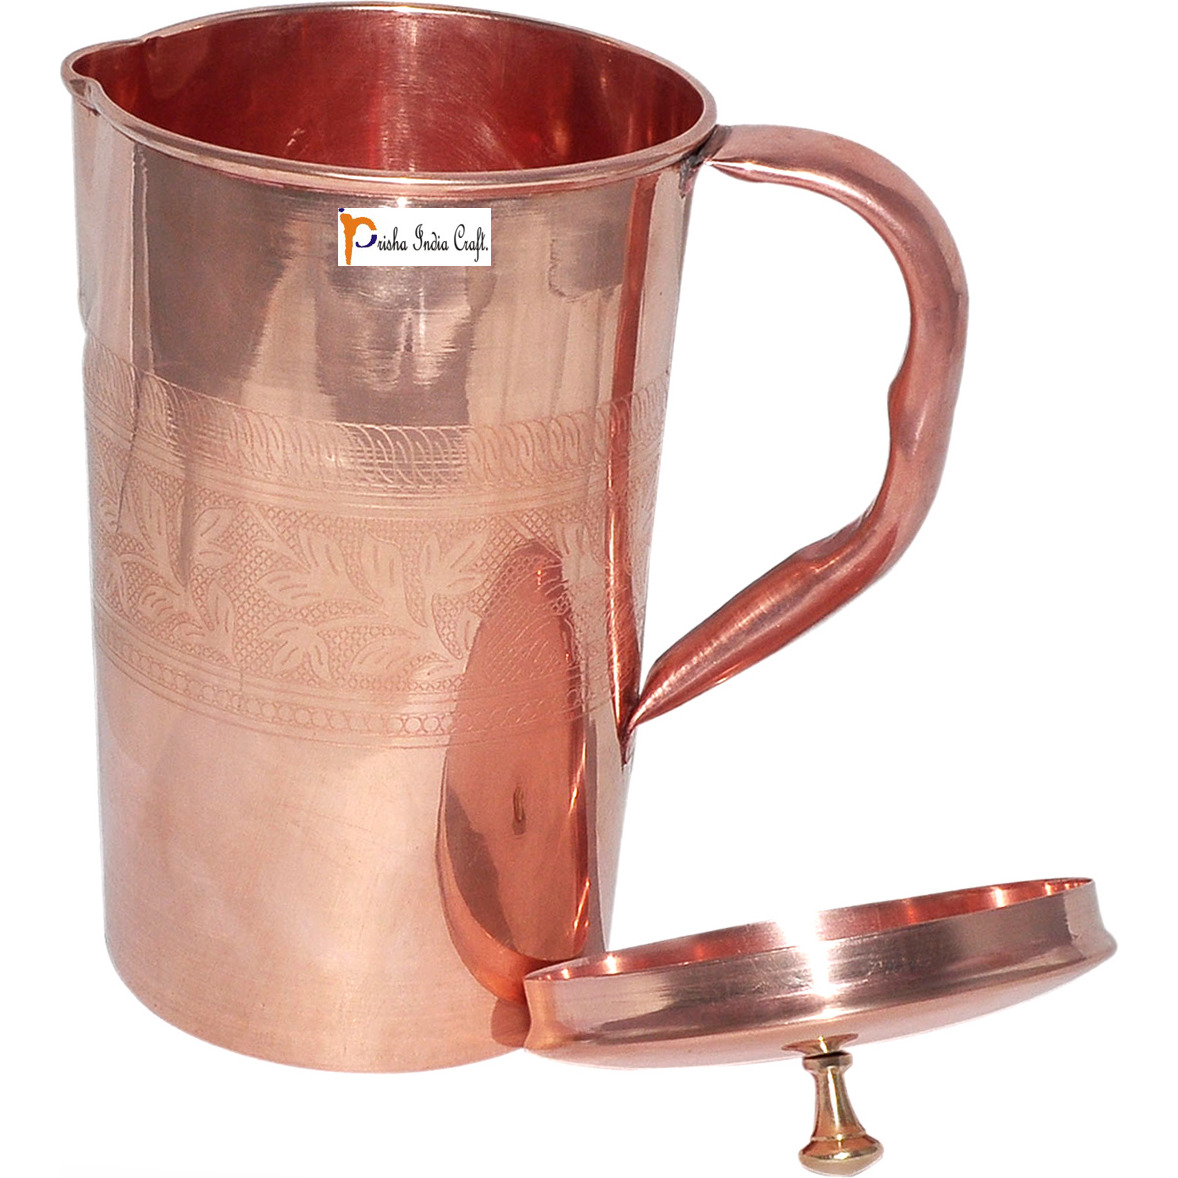 Prisha India Craft B. Dinnerware Traditional 100% Pure Copper Dinner Set of Thali Plate, Bowls, Glass and Spoon, Dia 12  With 1 Pure Copper Embossed Pitcher Jug - Christmas Gift